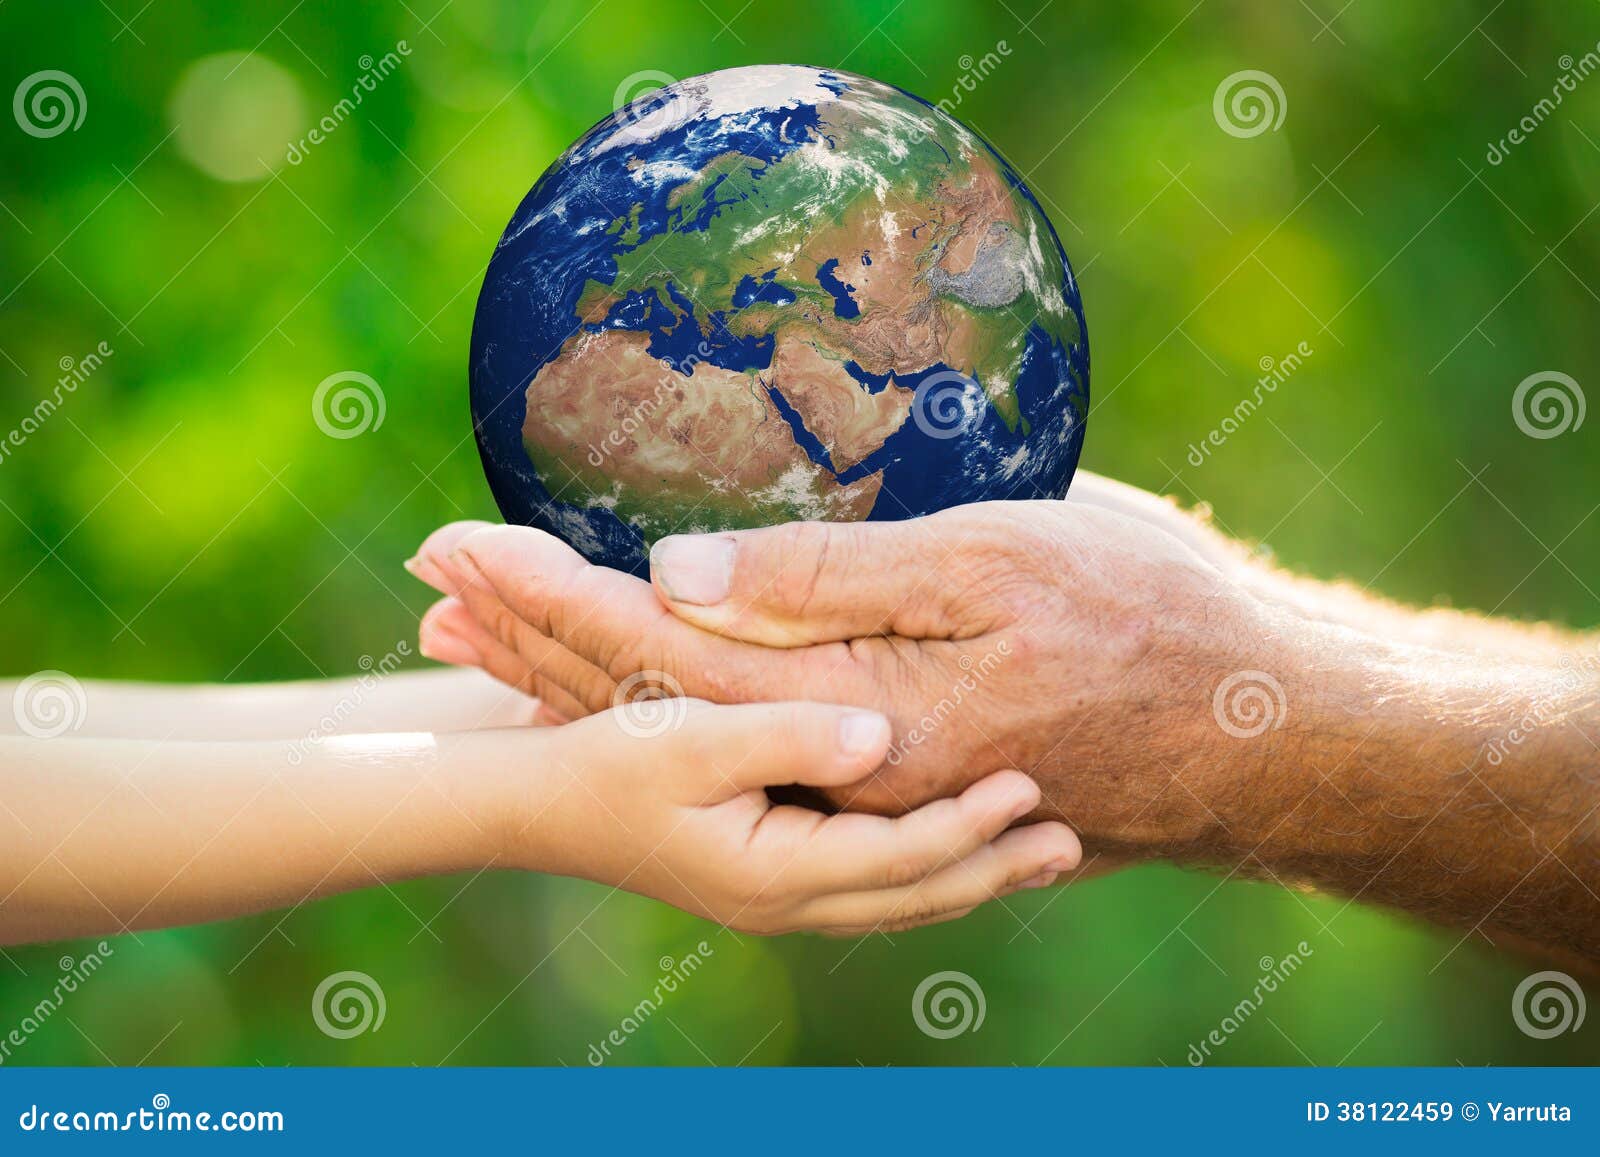 child and man holding earth in hands